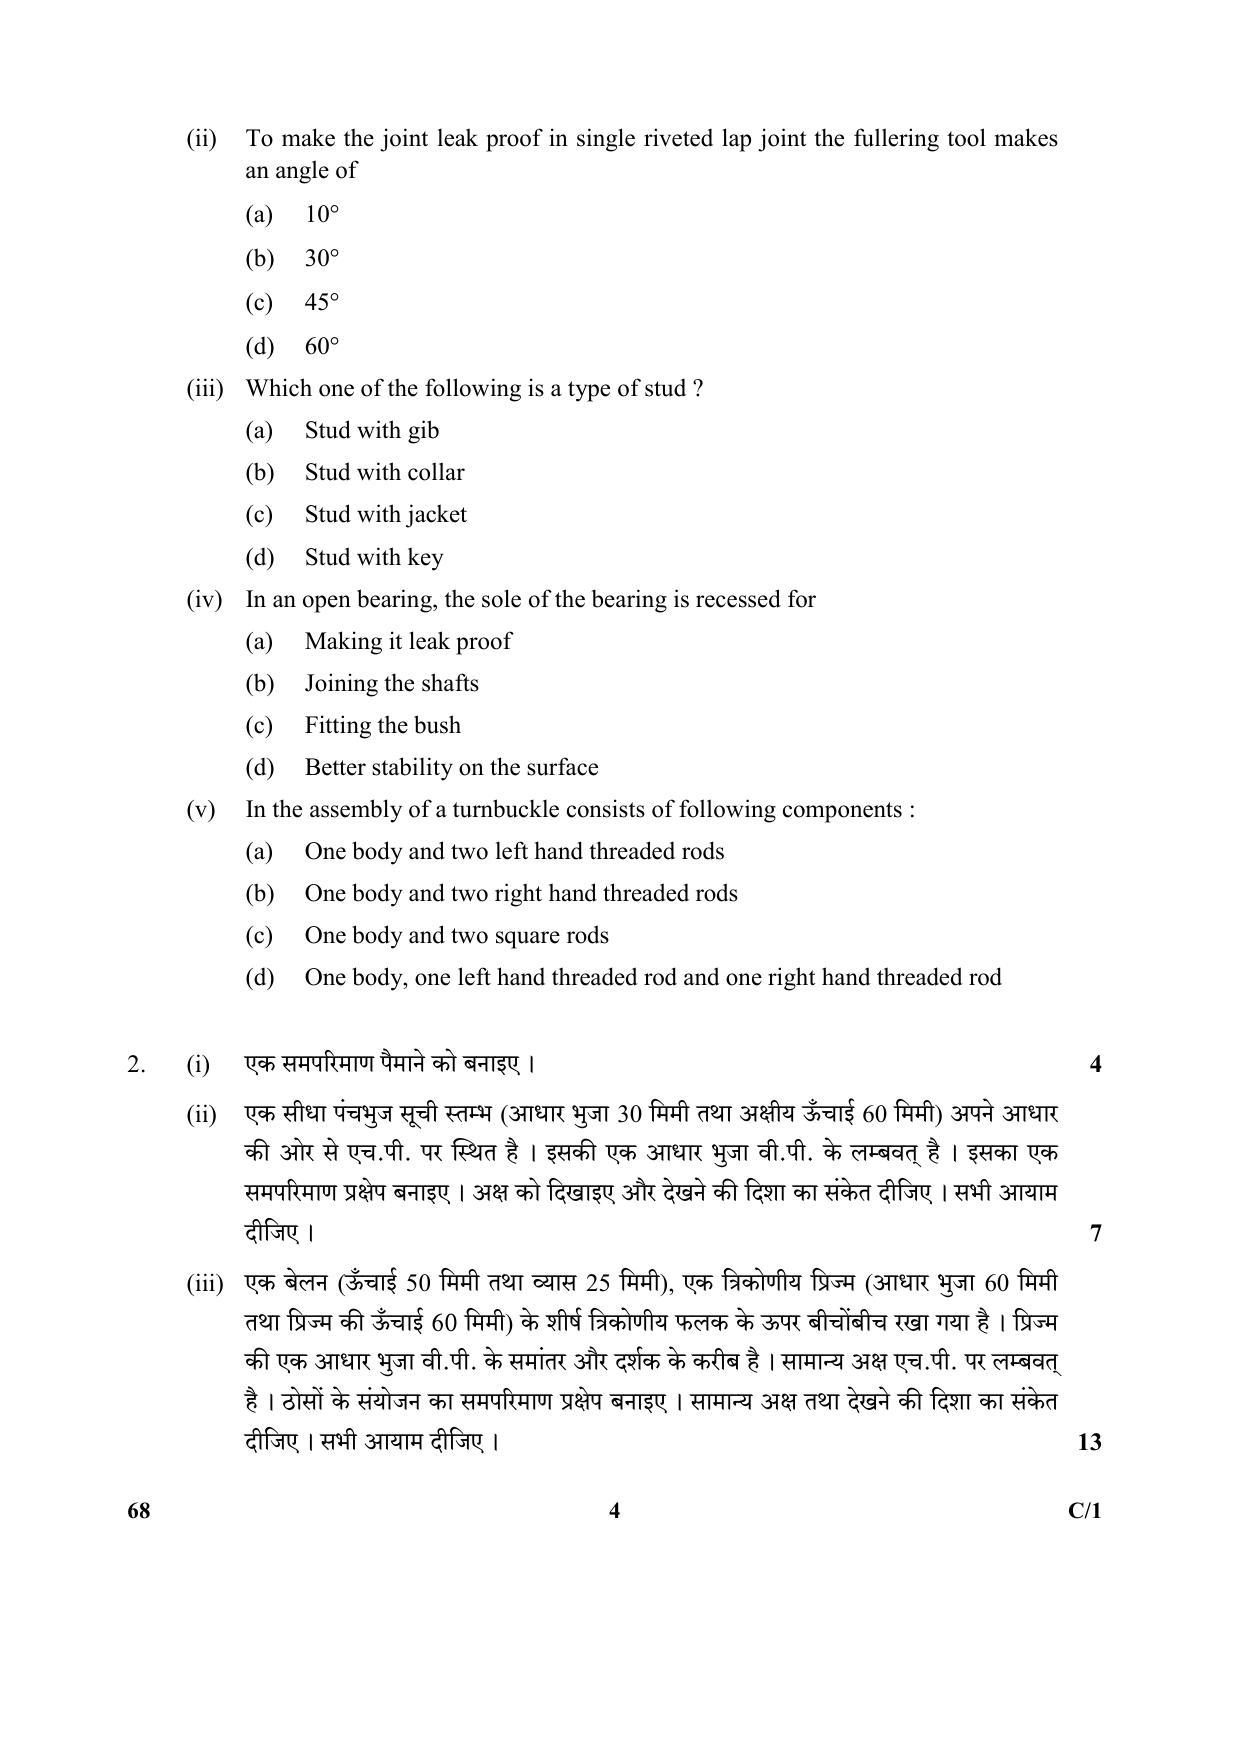 CBSE Class 12 68 (Engineering Graphics) 2018 Compartment Question Paper - Page 4